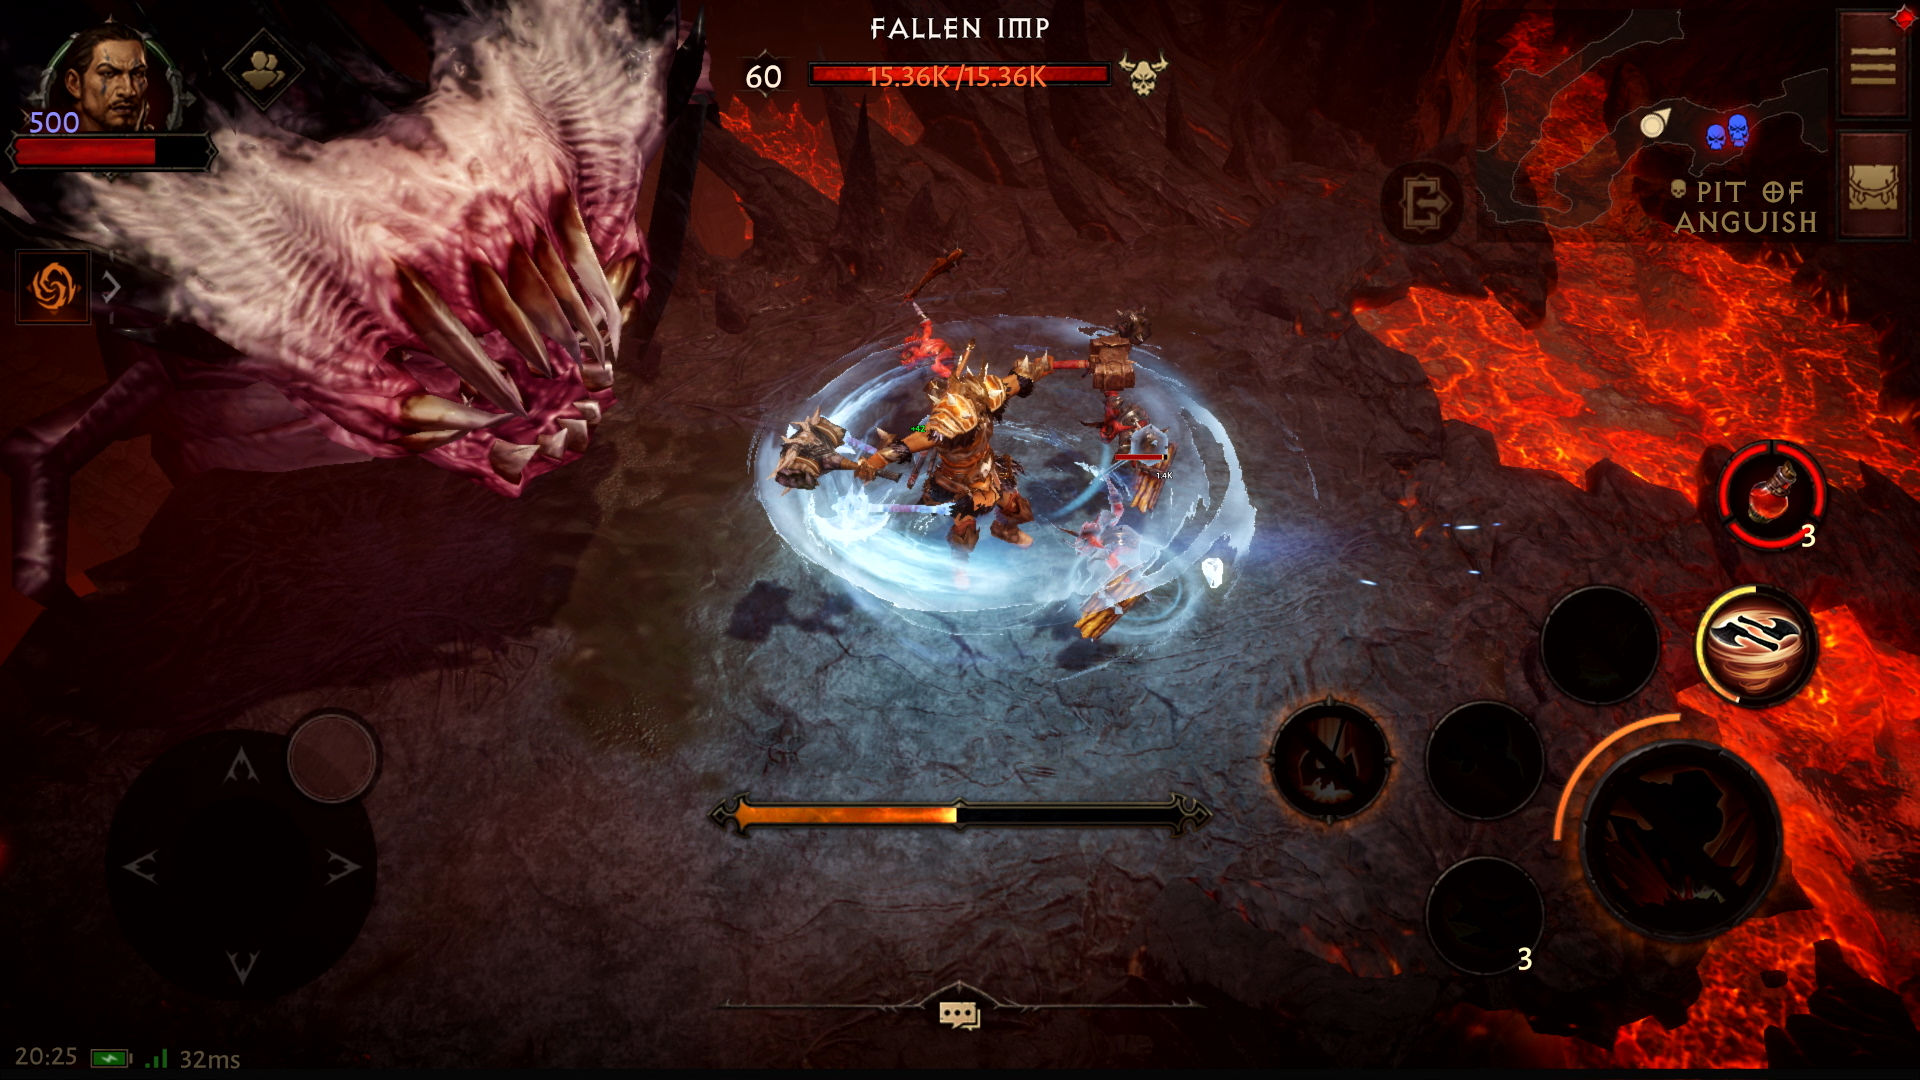 Diablo Immortal News, Reviews and Information